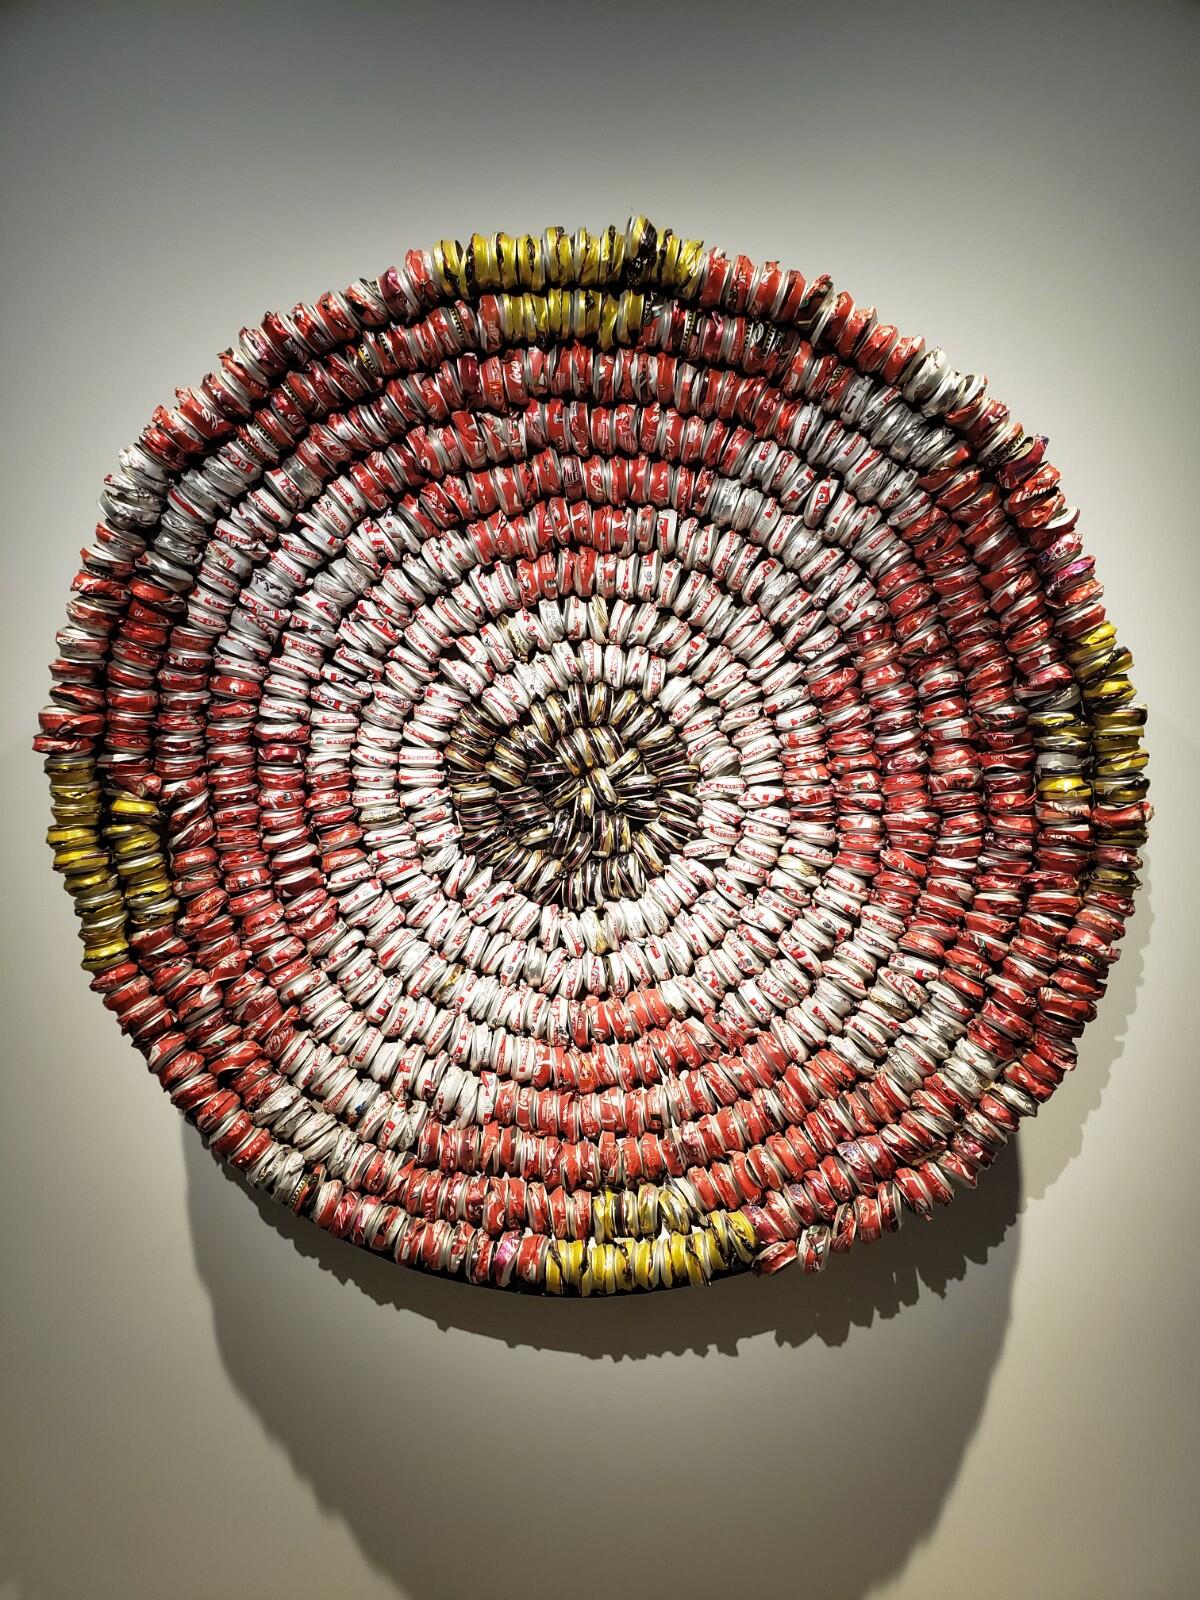 Hundreds of crushed beer and soda cans in a spiral pattern.